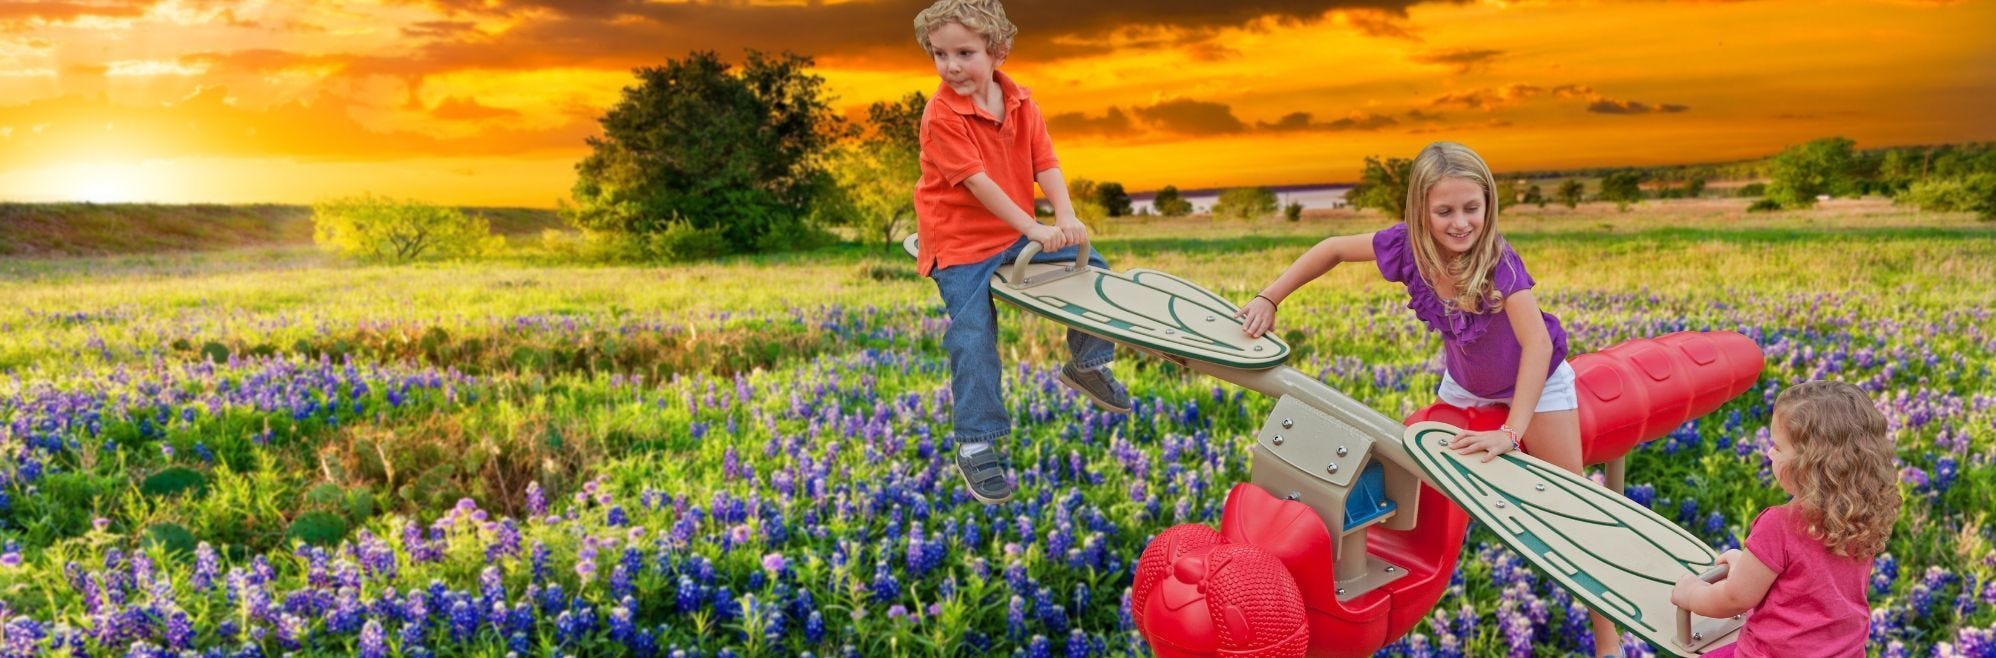 23 New Texas Playgrounds Thanks to GameTime Funding